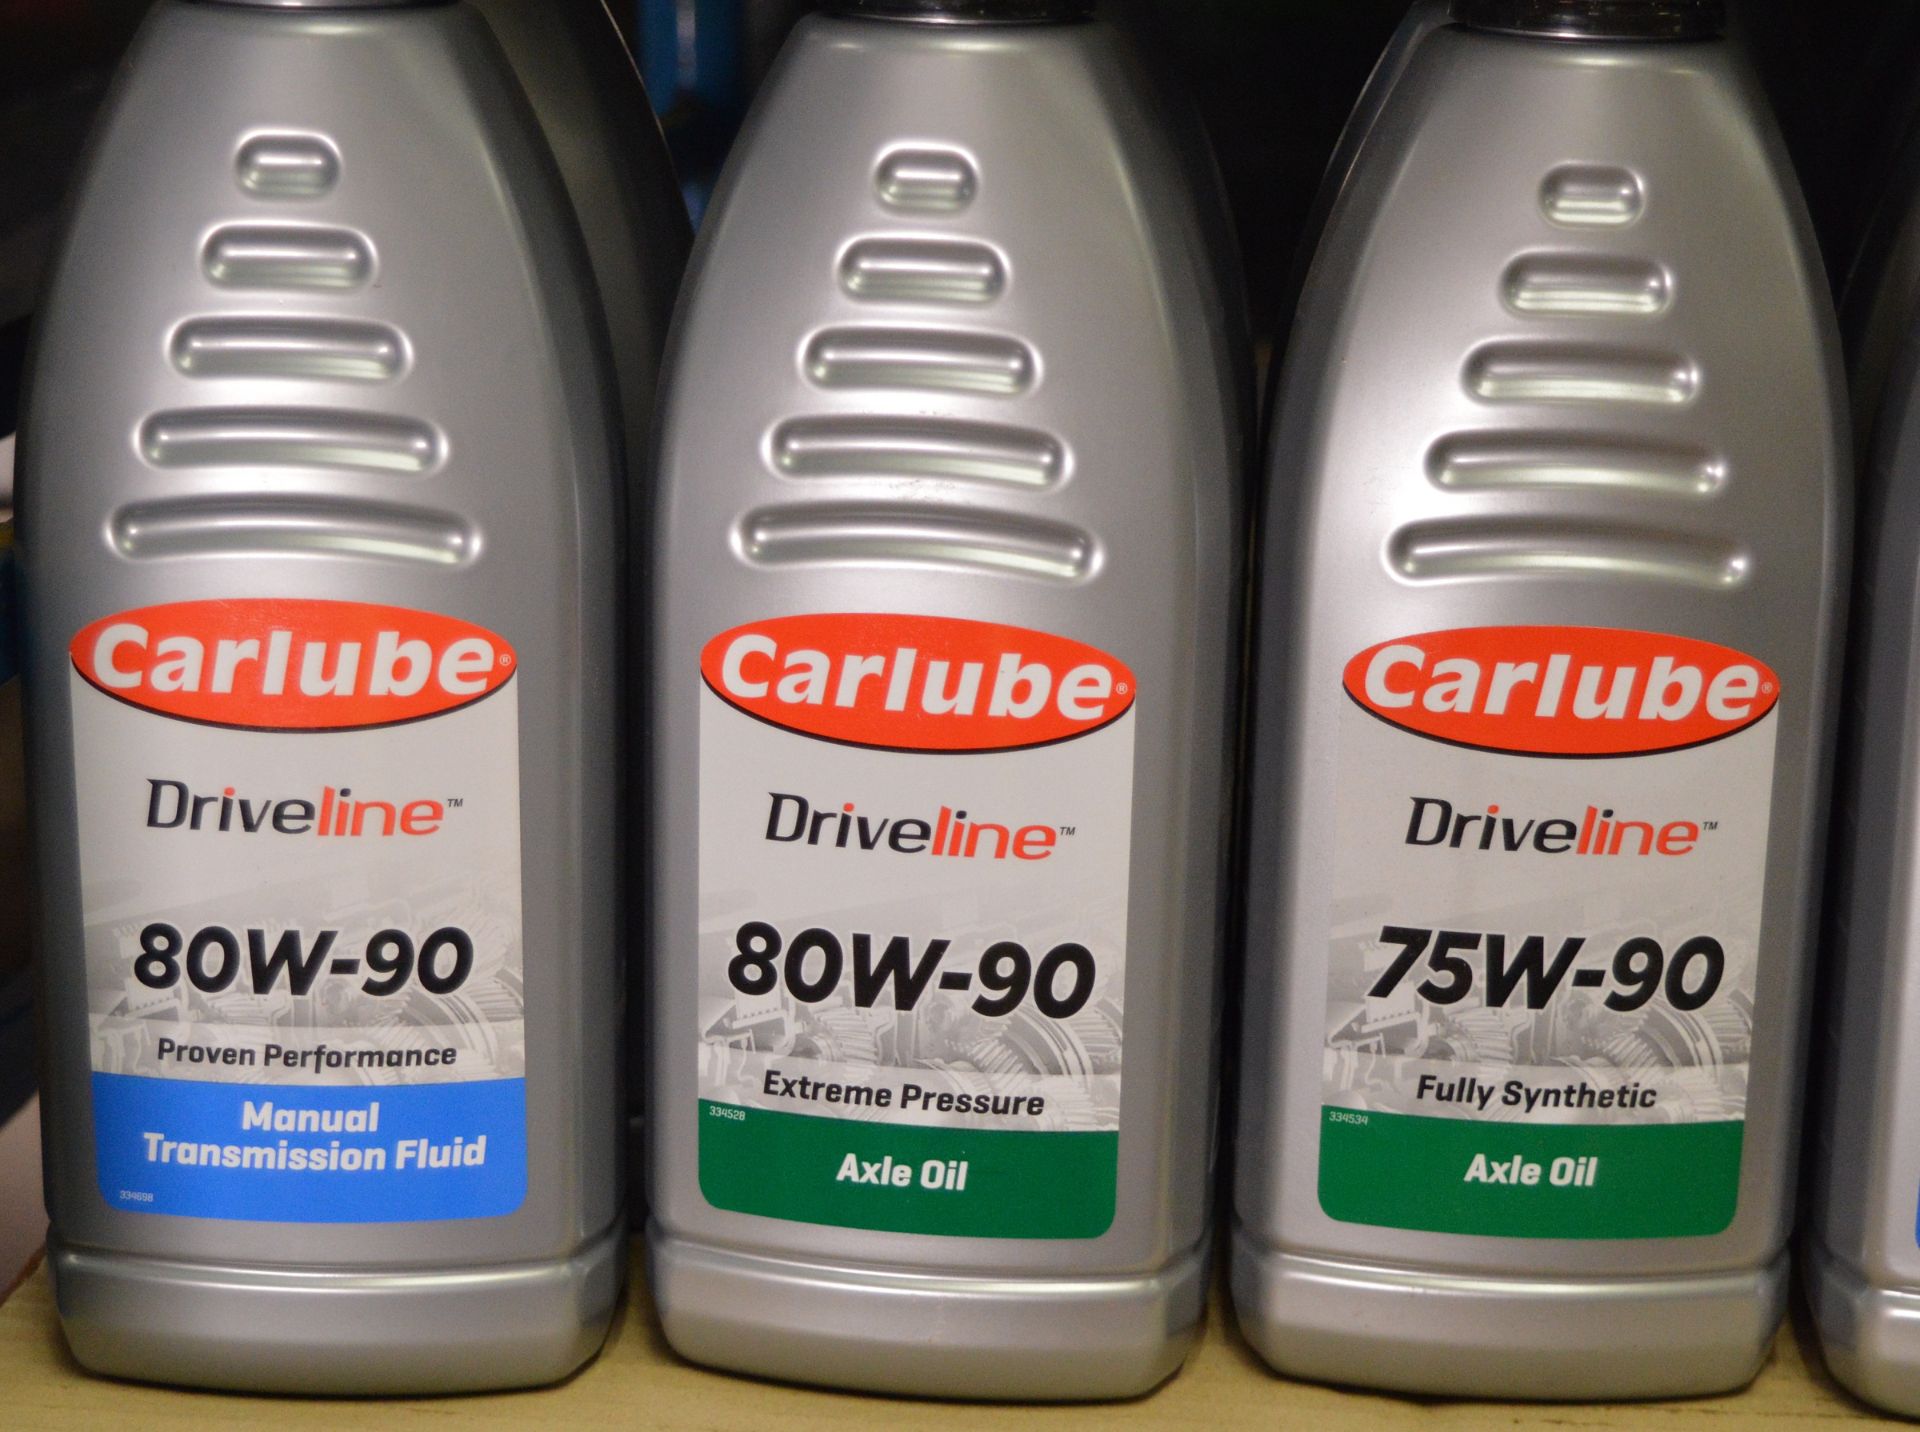 Carlube Manual Transmission Fluid, Axle Oil, Total Driveline Lubricant - 1 litre & more - Image 2 of 5